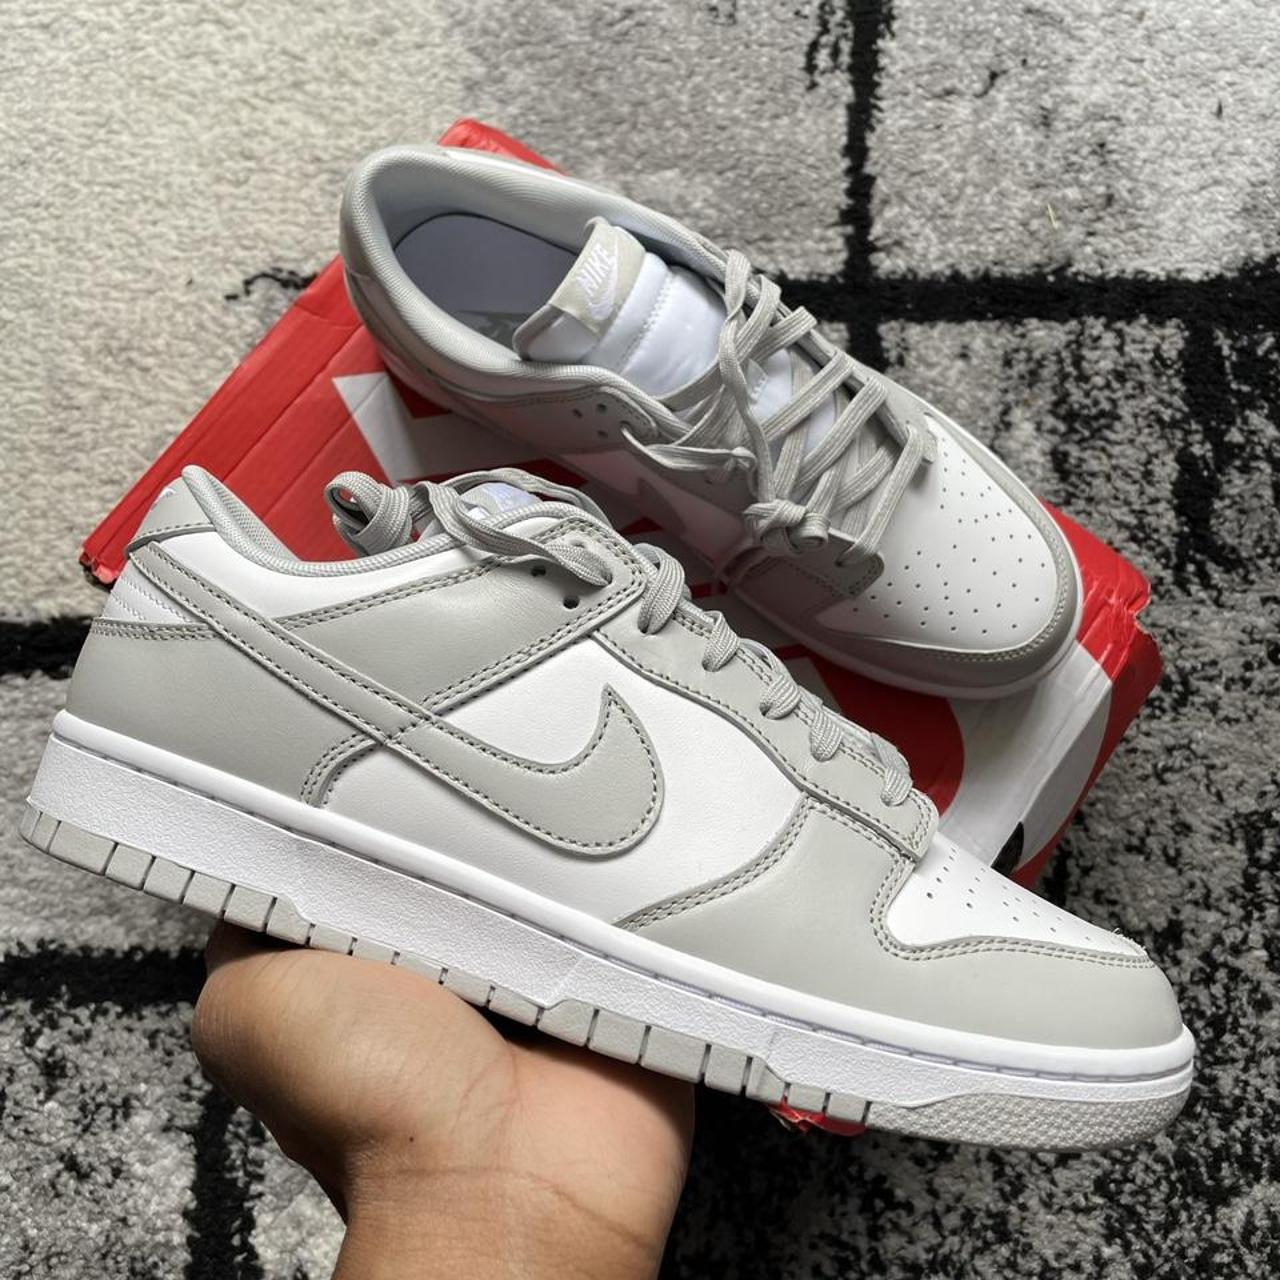 Nike dunk low grey fog - Authentic - Next day... - Depop